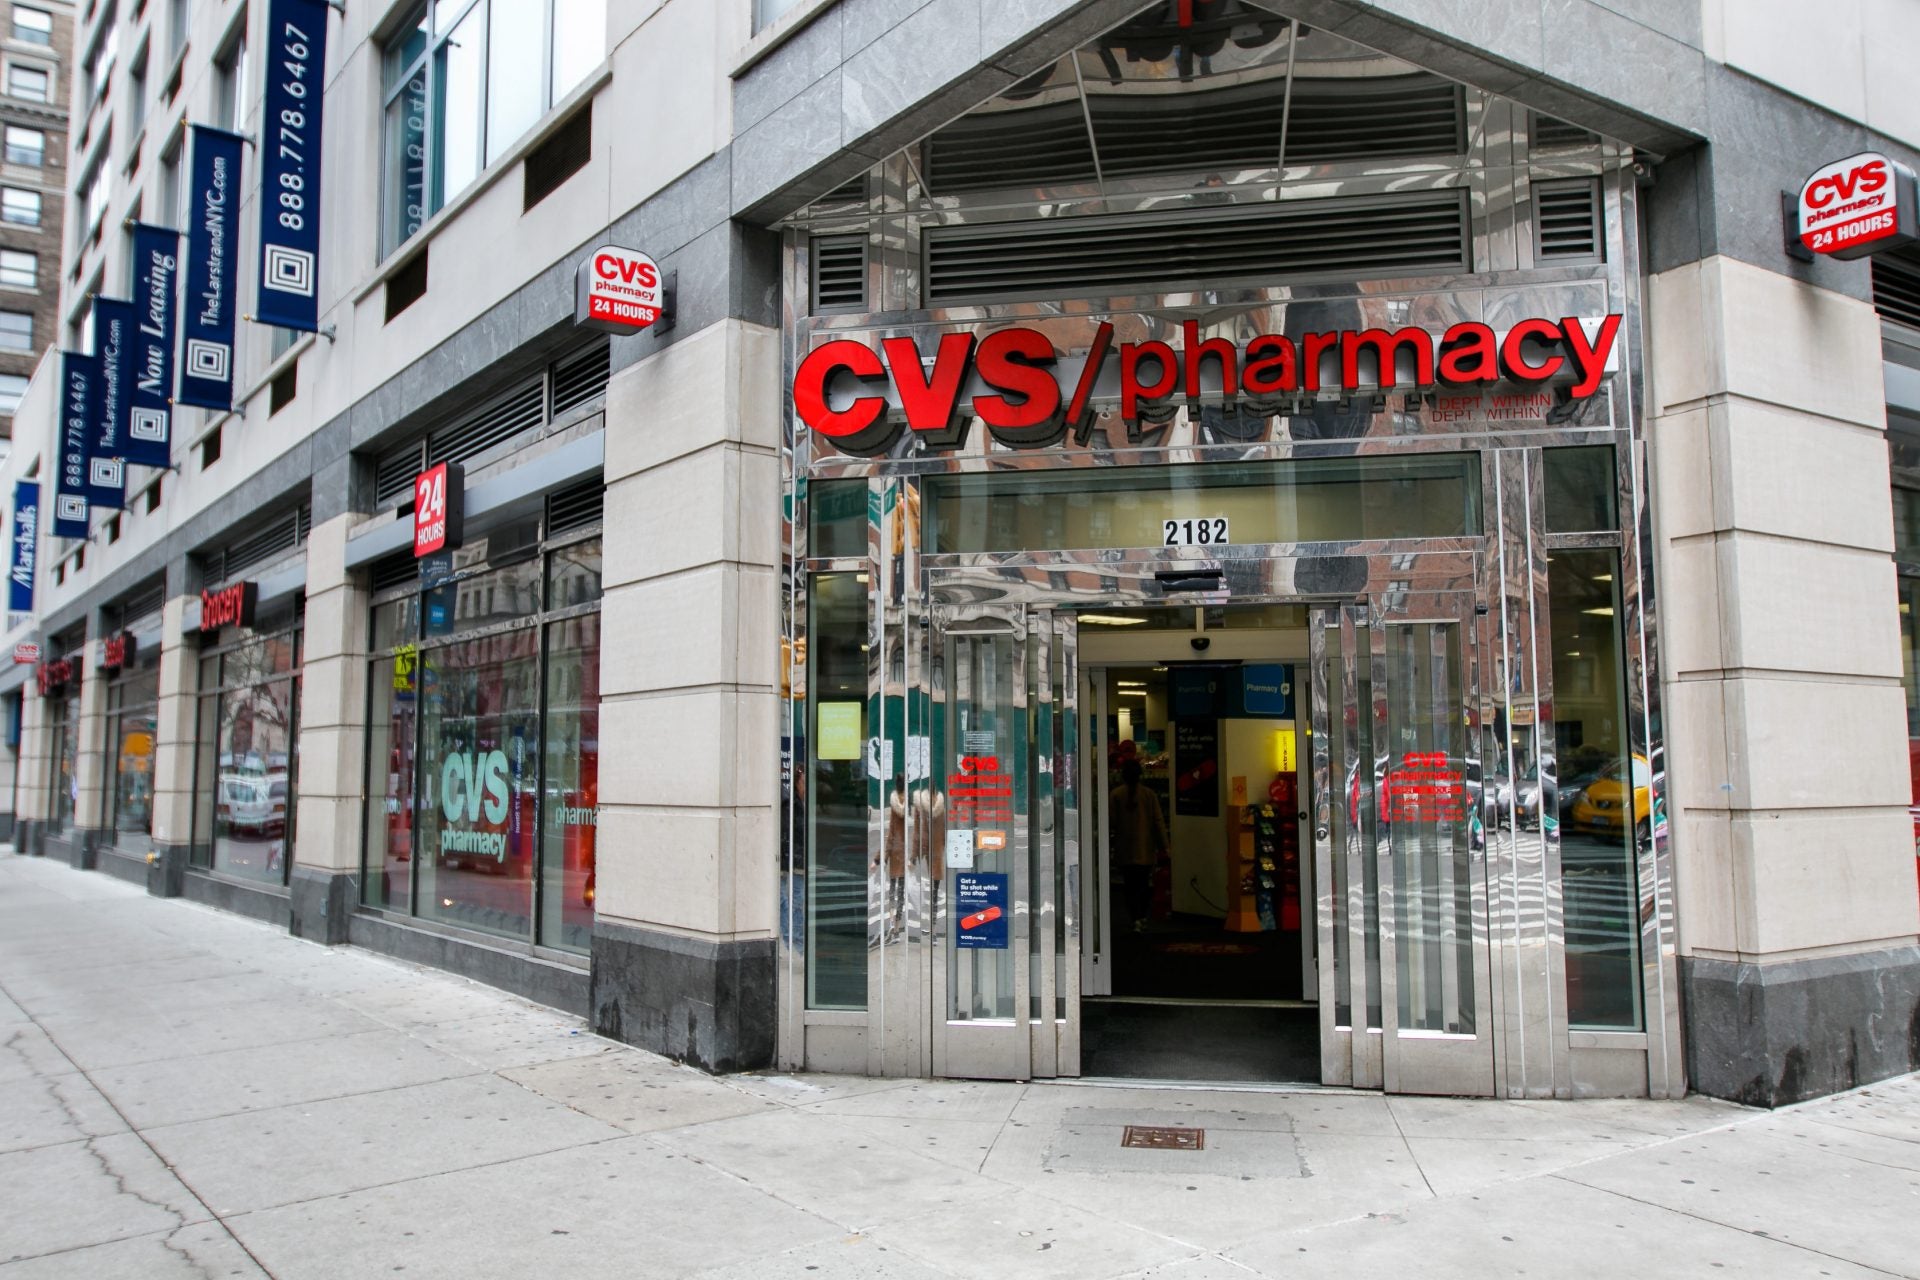 Which CBD Products Are Sold at CVS?